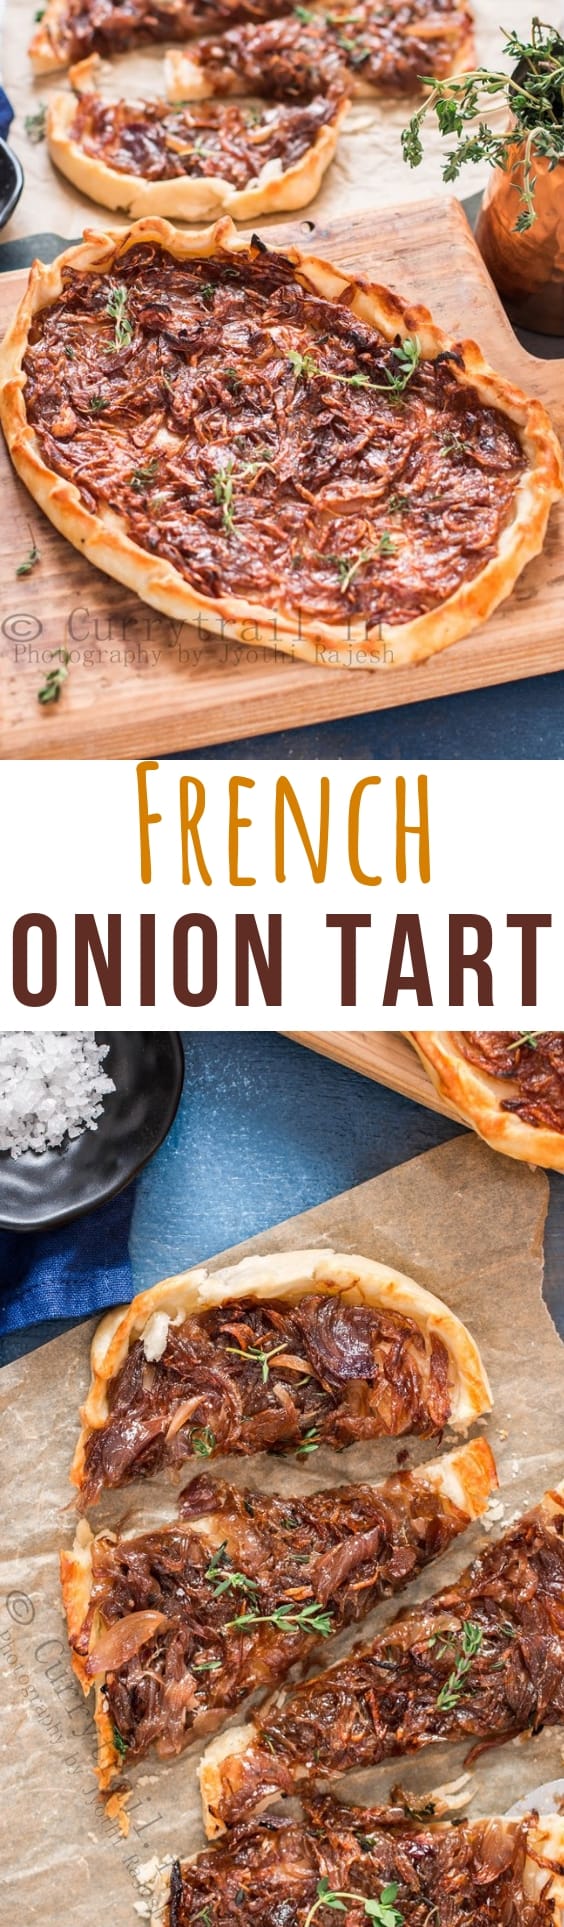 french onion tart with text overlay